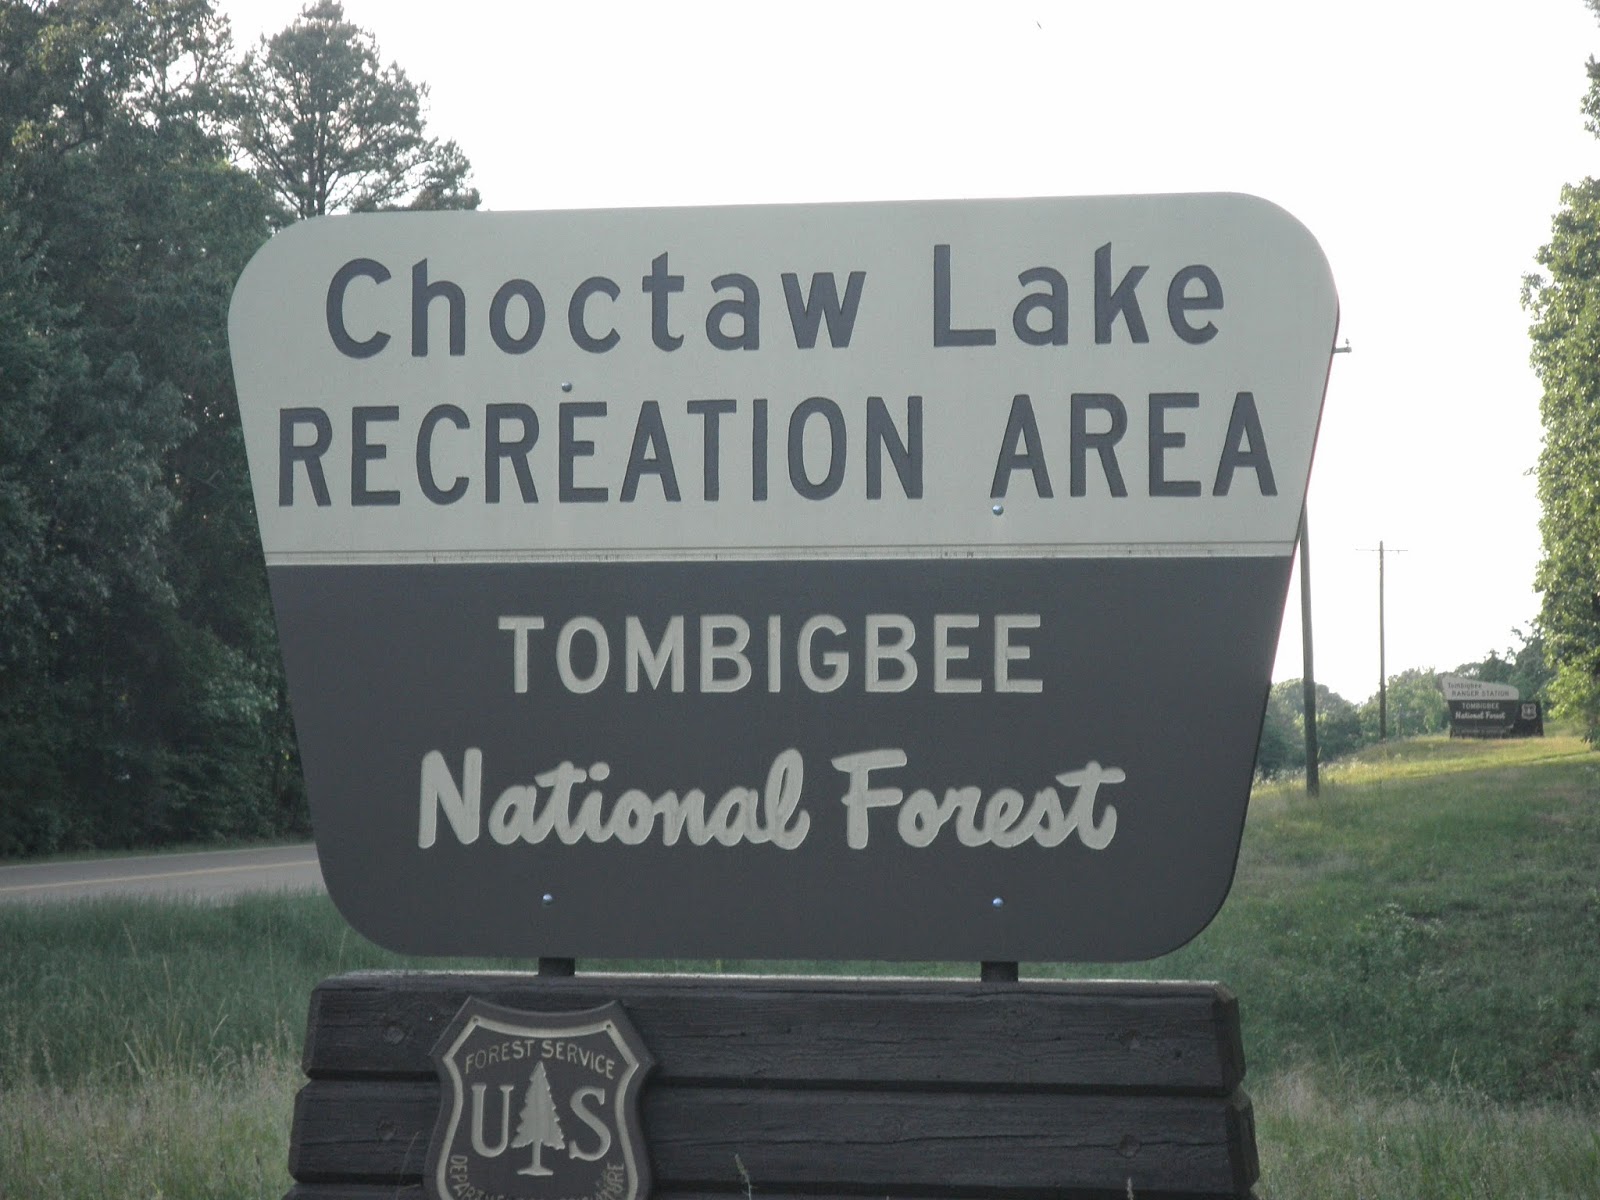 Where In The Usa Rv Choctaw Lake At Tombigbee National Forest